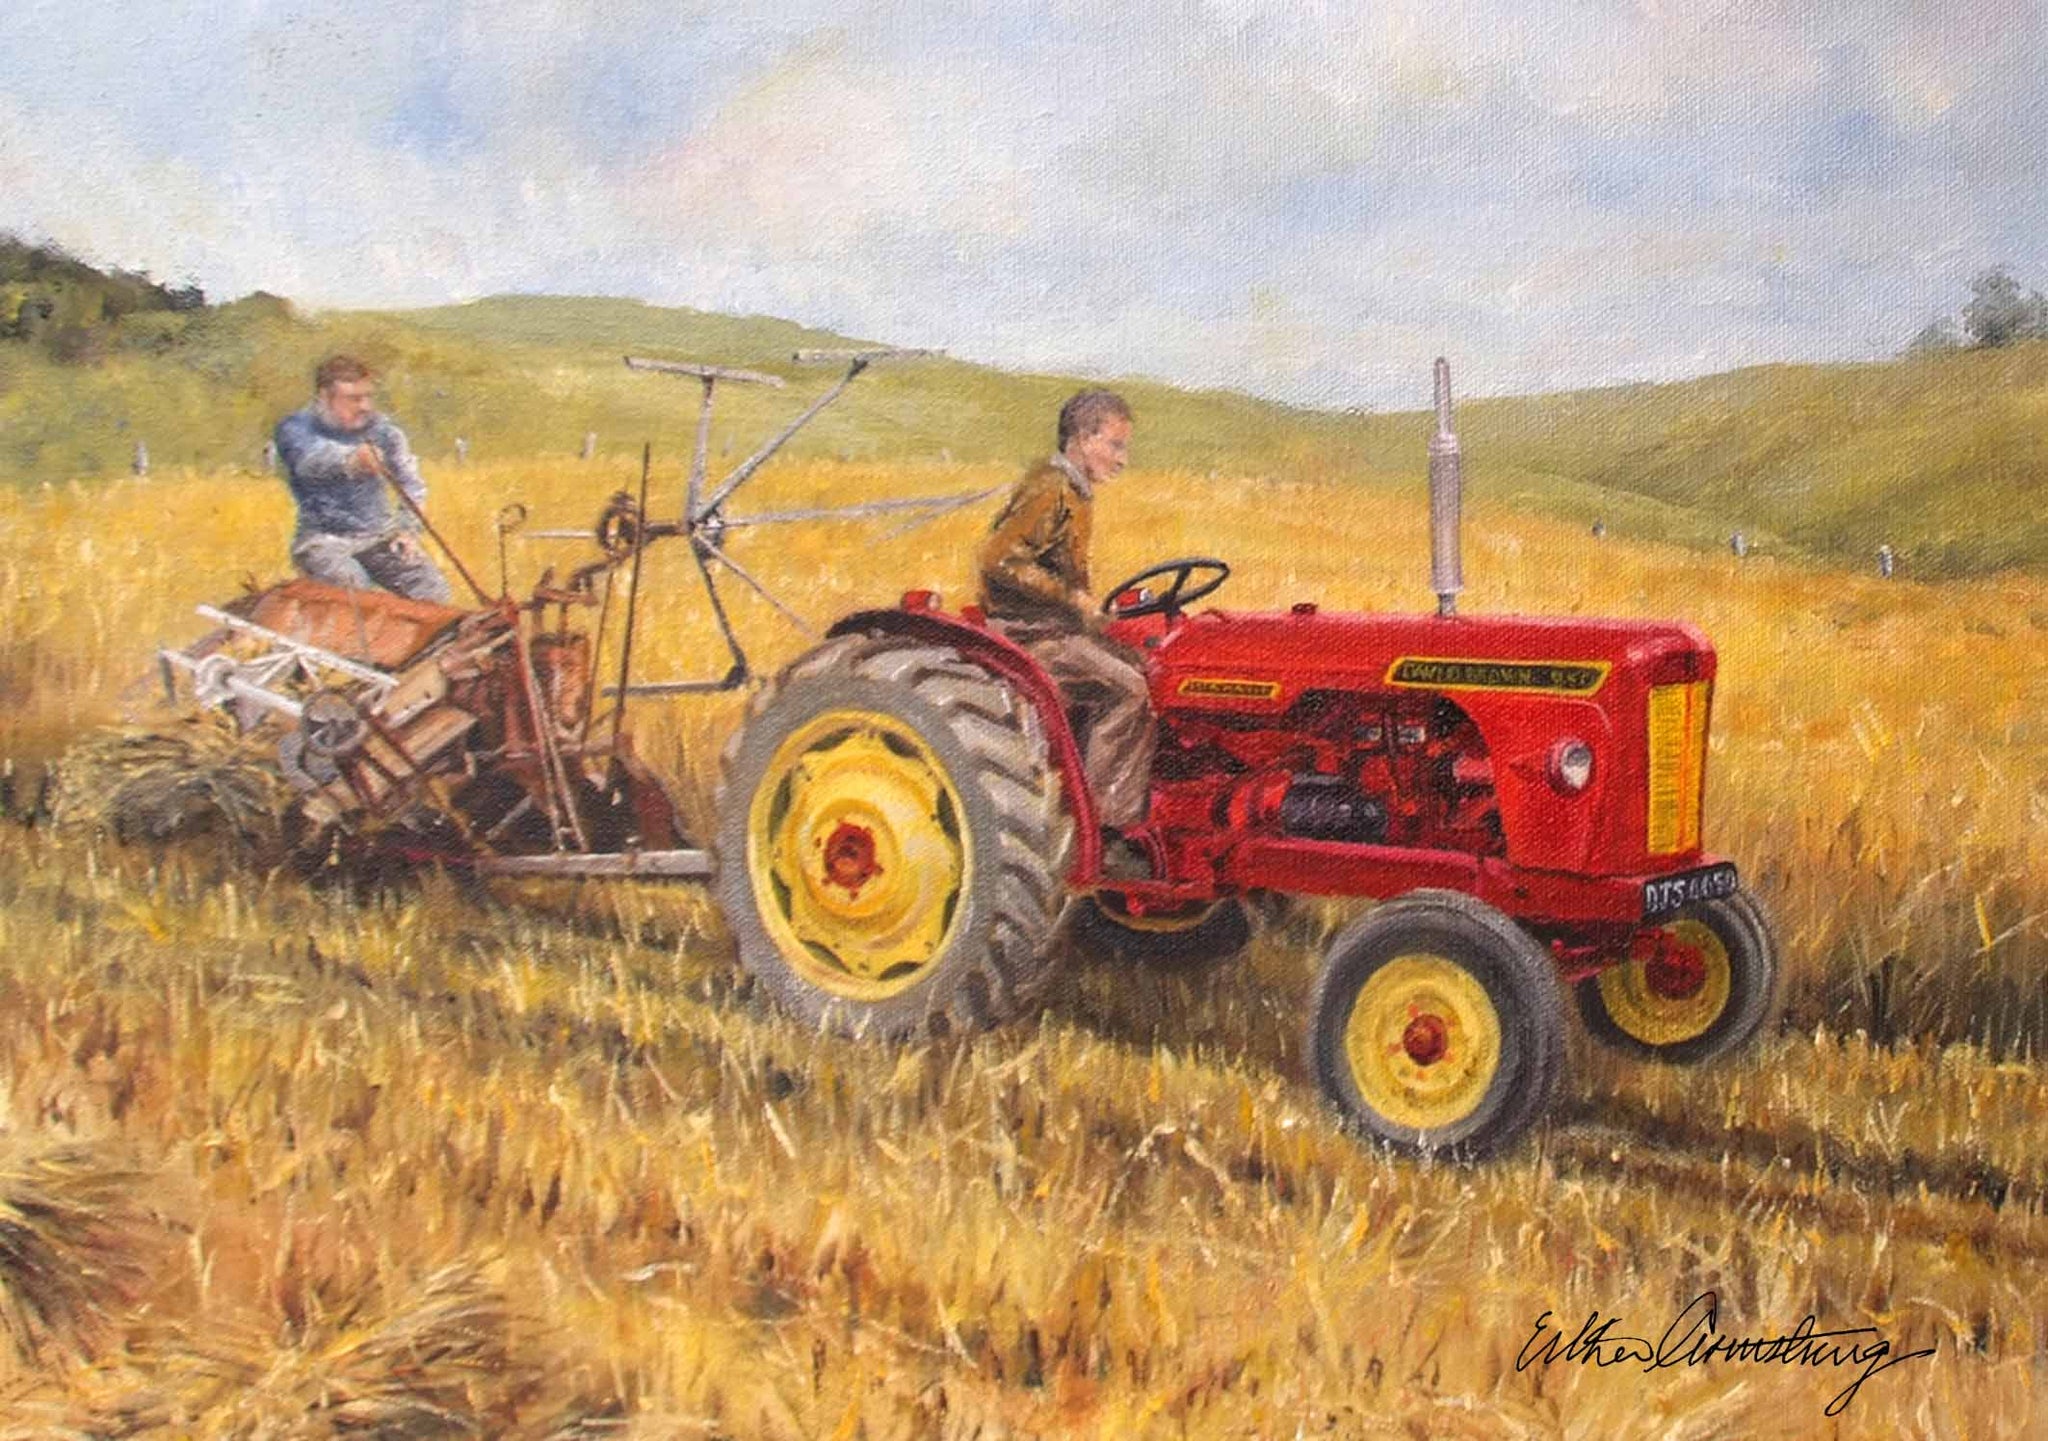 A6 mounted print of a David Brown tractor at the harvest